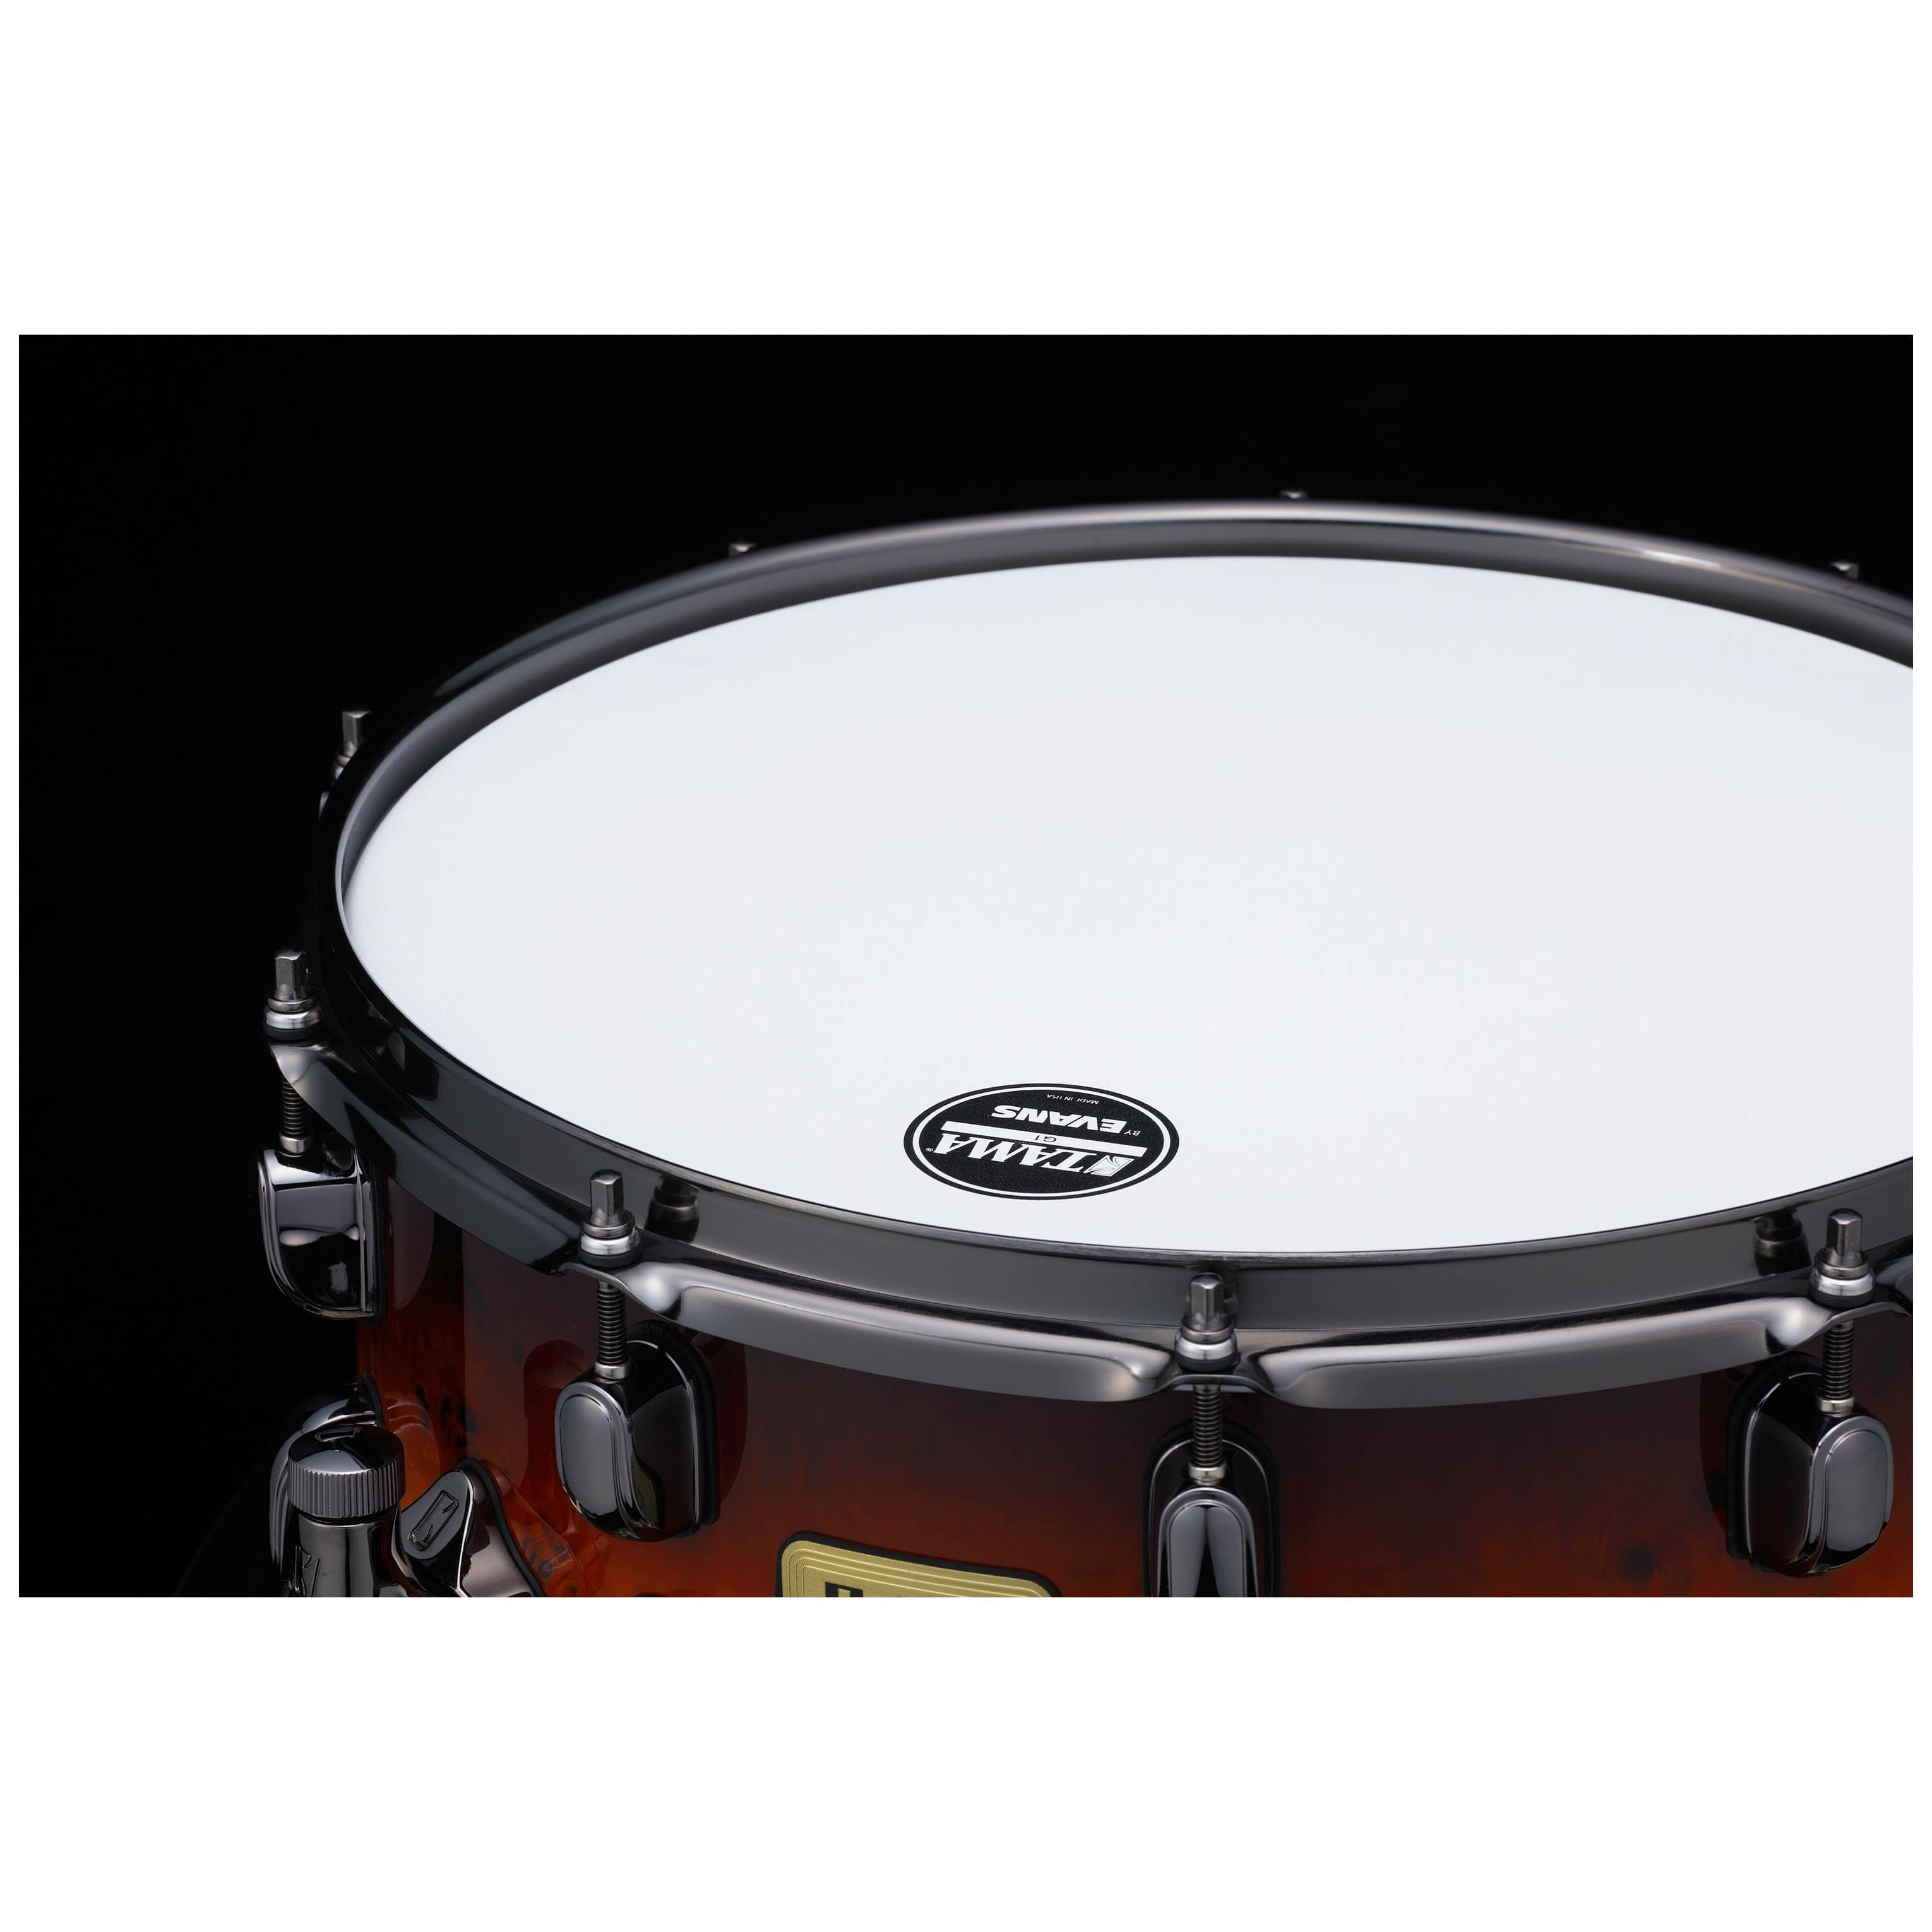 Tama LGK146-ASF Sound Lab Project Limited G-Kapur Snare Drum - 14" x 6" Amber Sunset Fade/Chrom HW 3